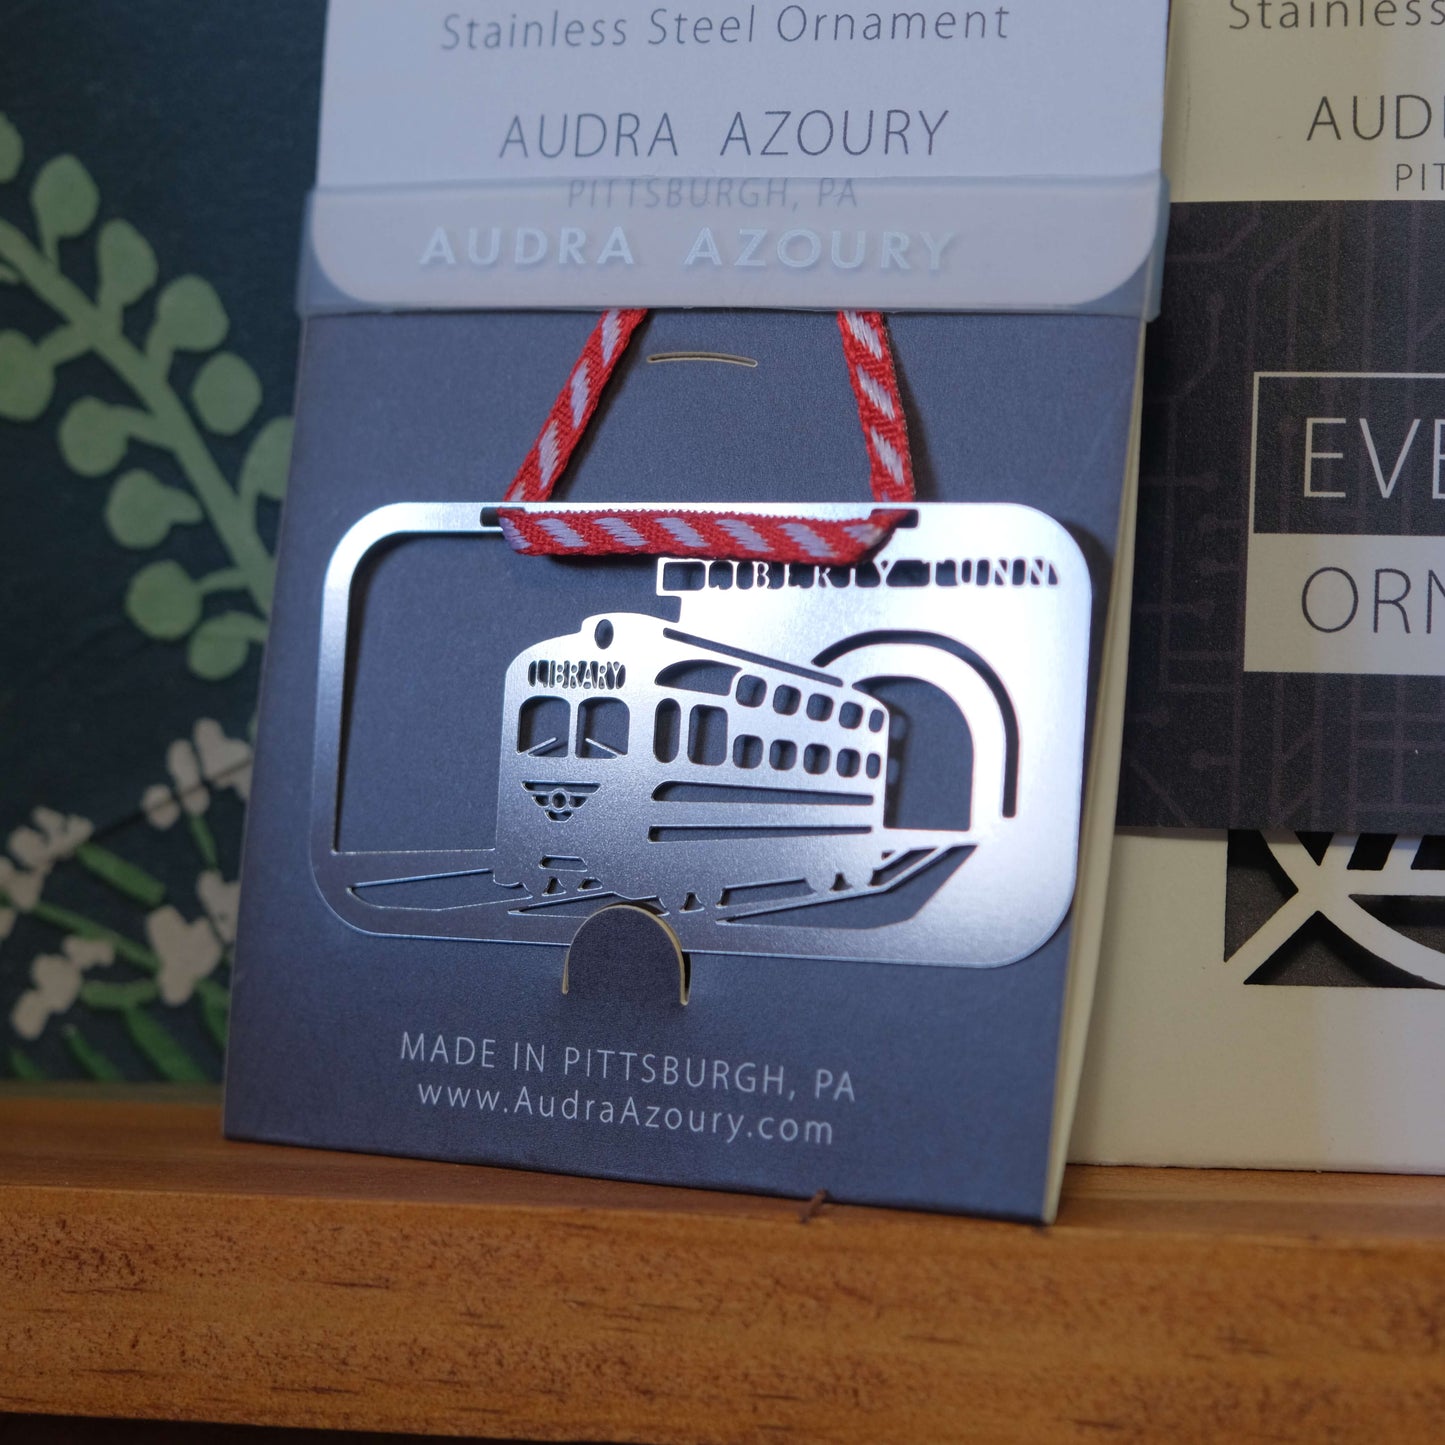 Pittsburgh Trolley Stainless Steel Ornament by Audra Azoury